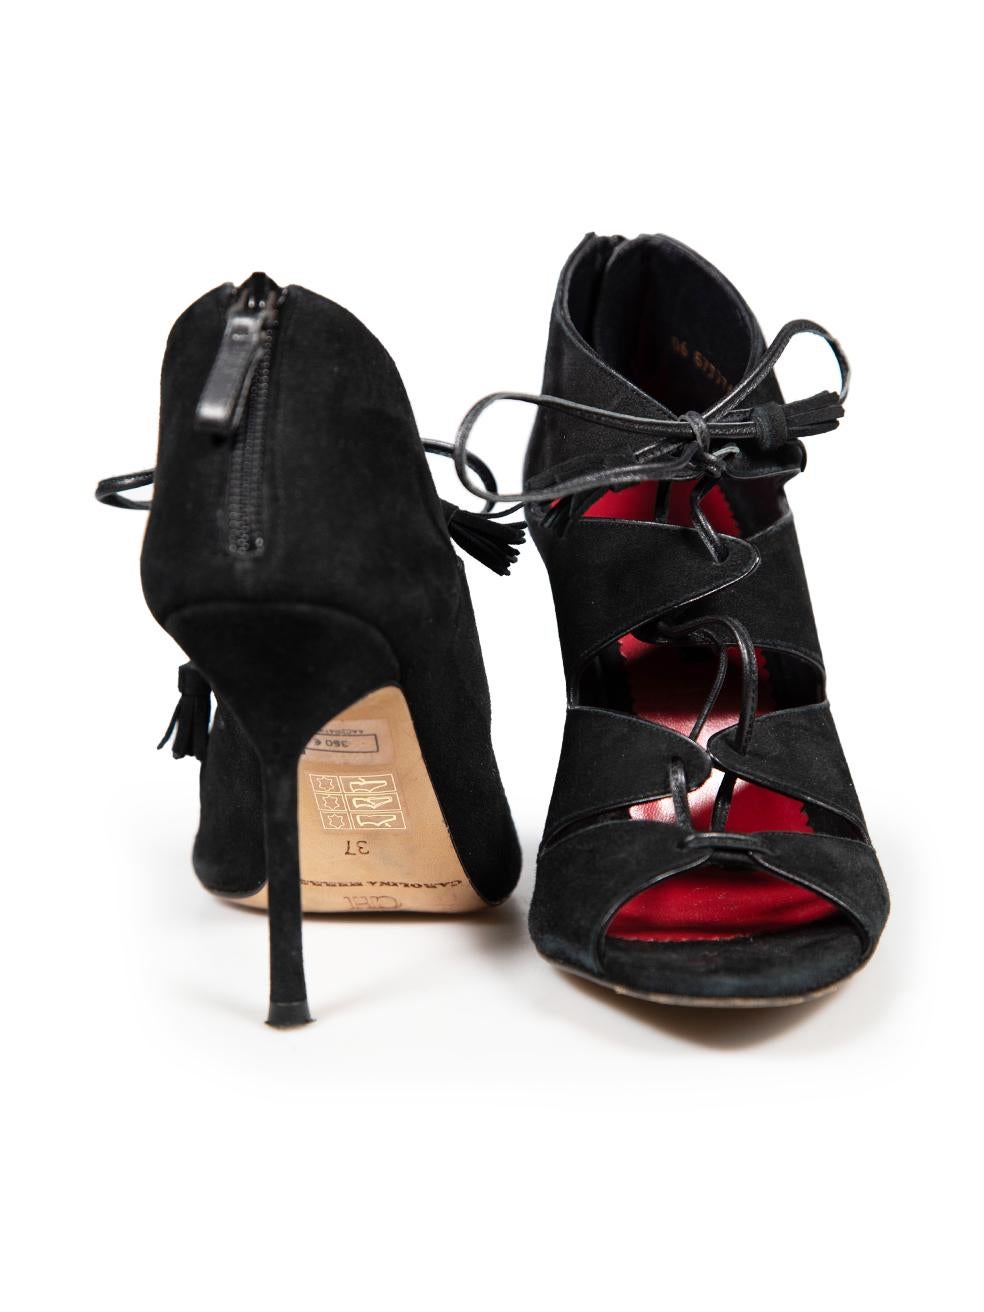 Carolina Herrera Black Suede Lace Up Ankle Heels Size IT 37 In Excellent Condition For Sale In London, GB